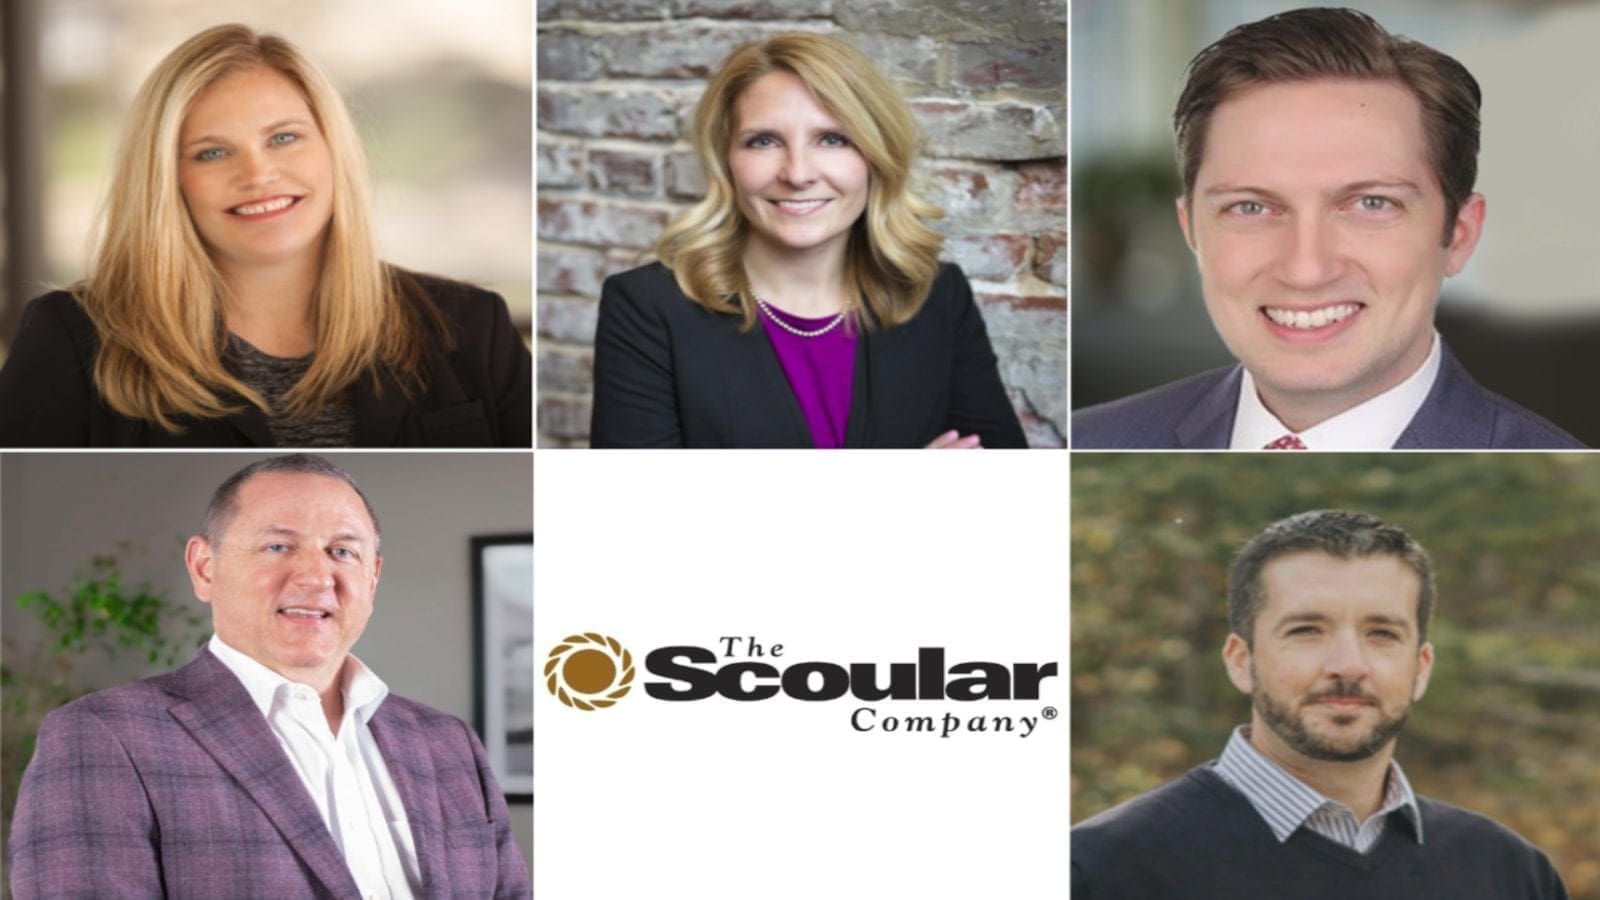 Agricultural marketer Scoular Company makes strategic appointments to bolster growth